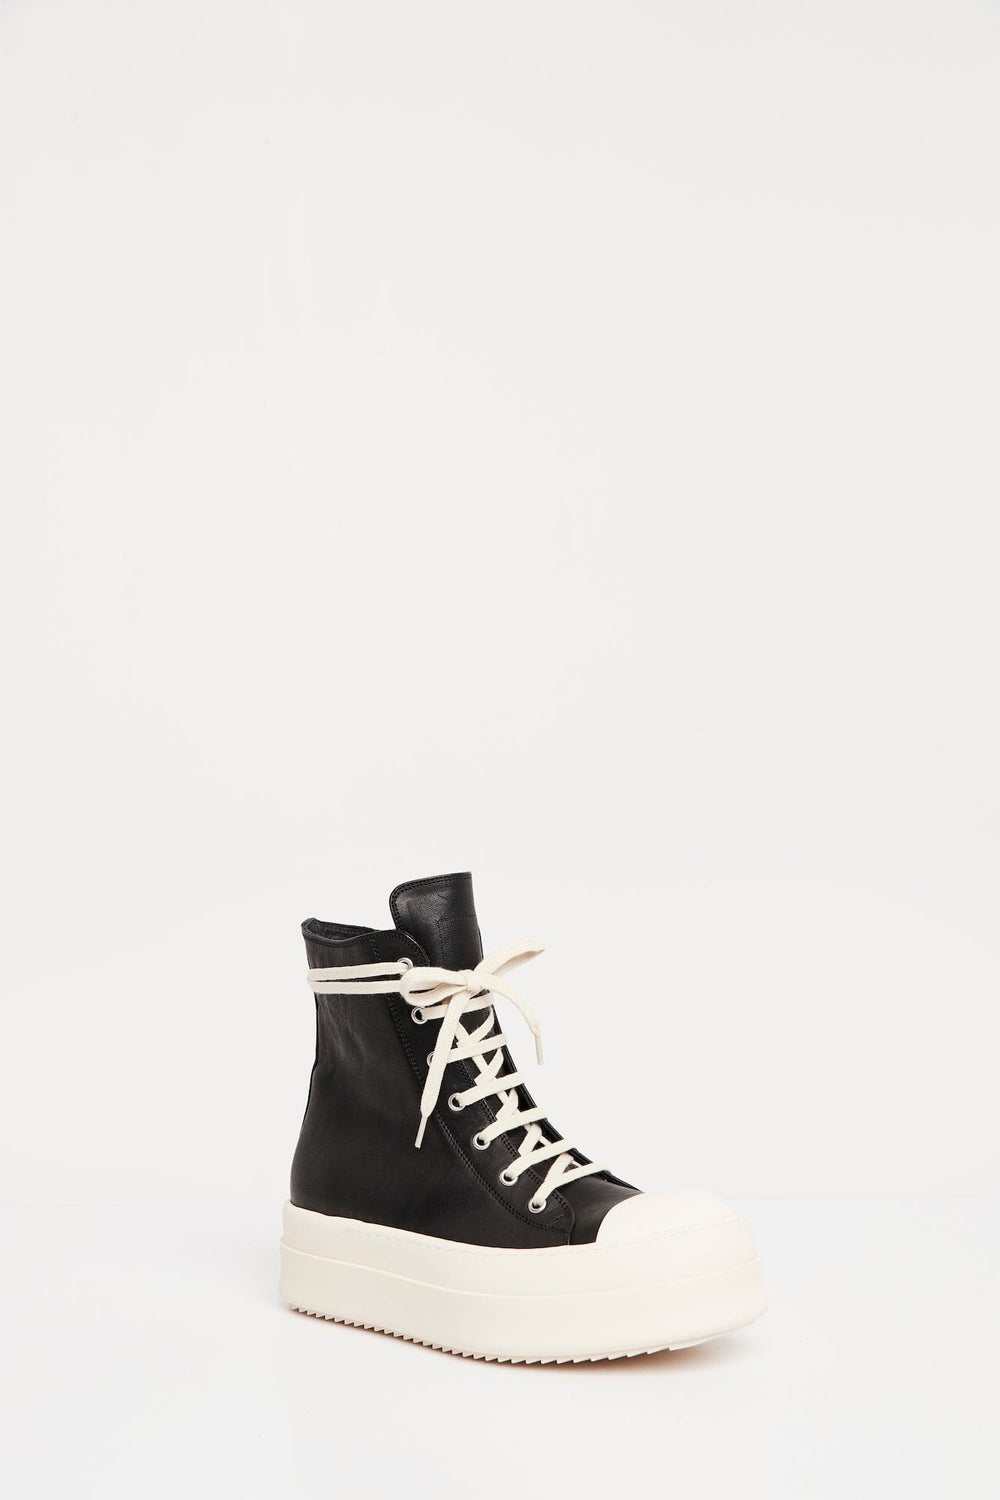 Bumper leather high-top sneakers in black - Rick Owens